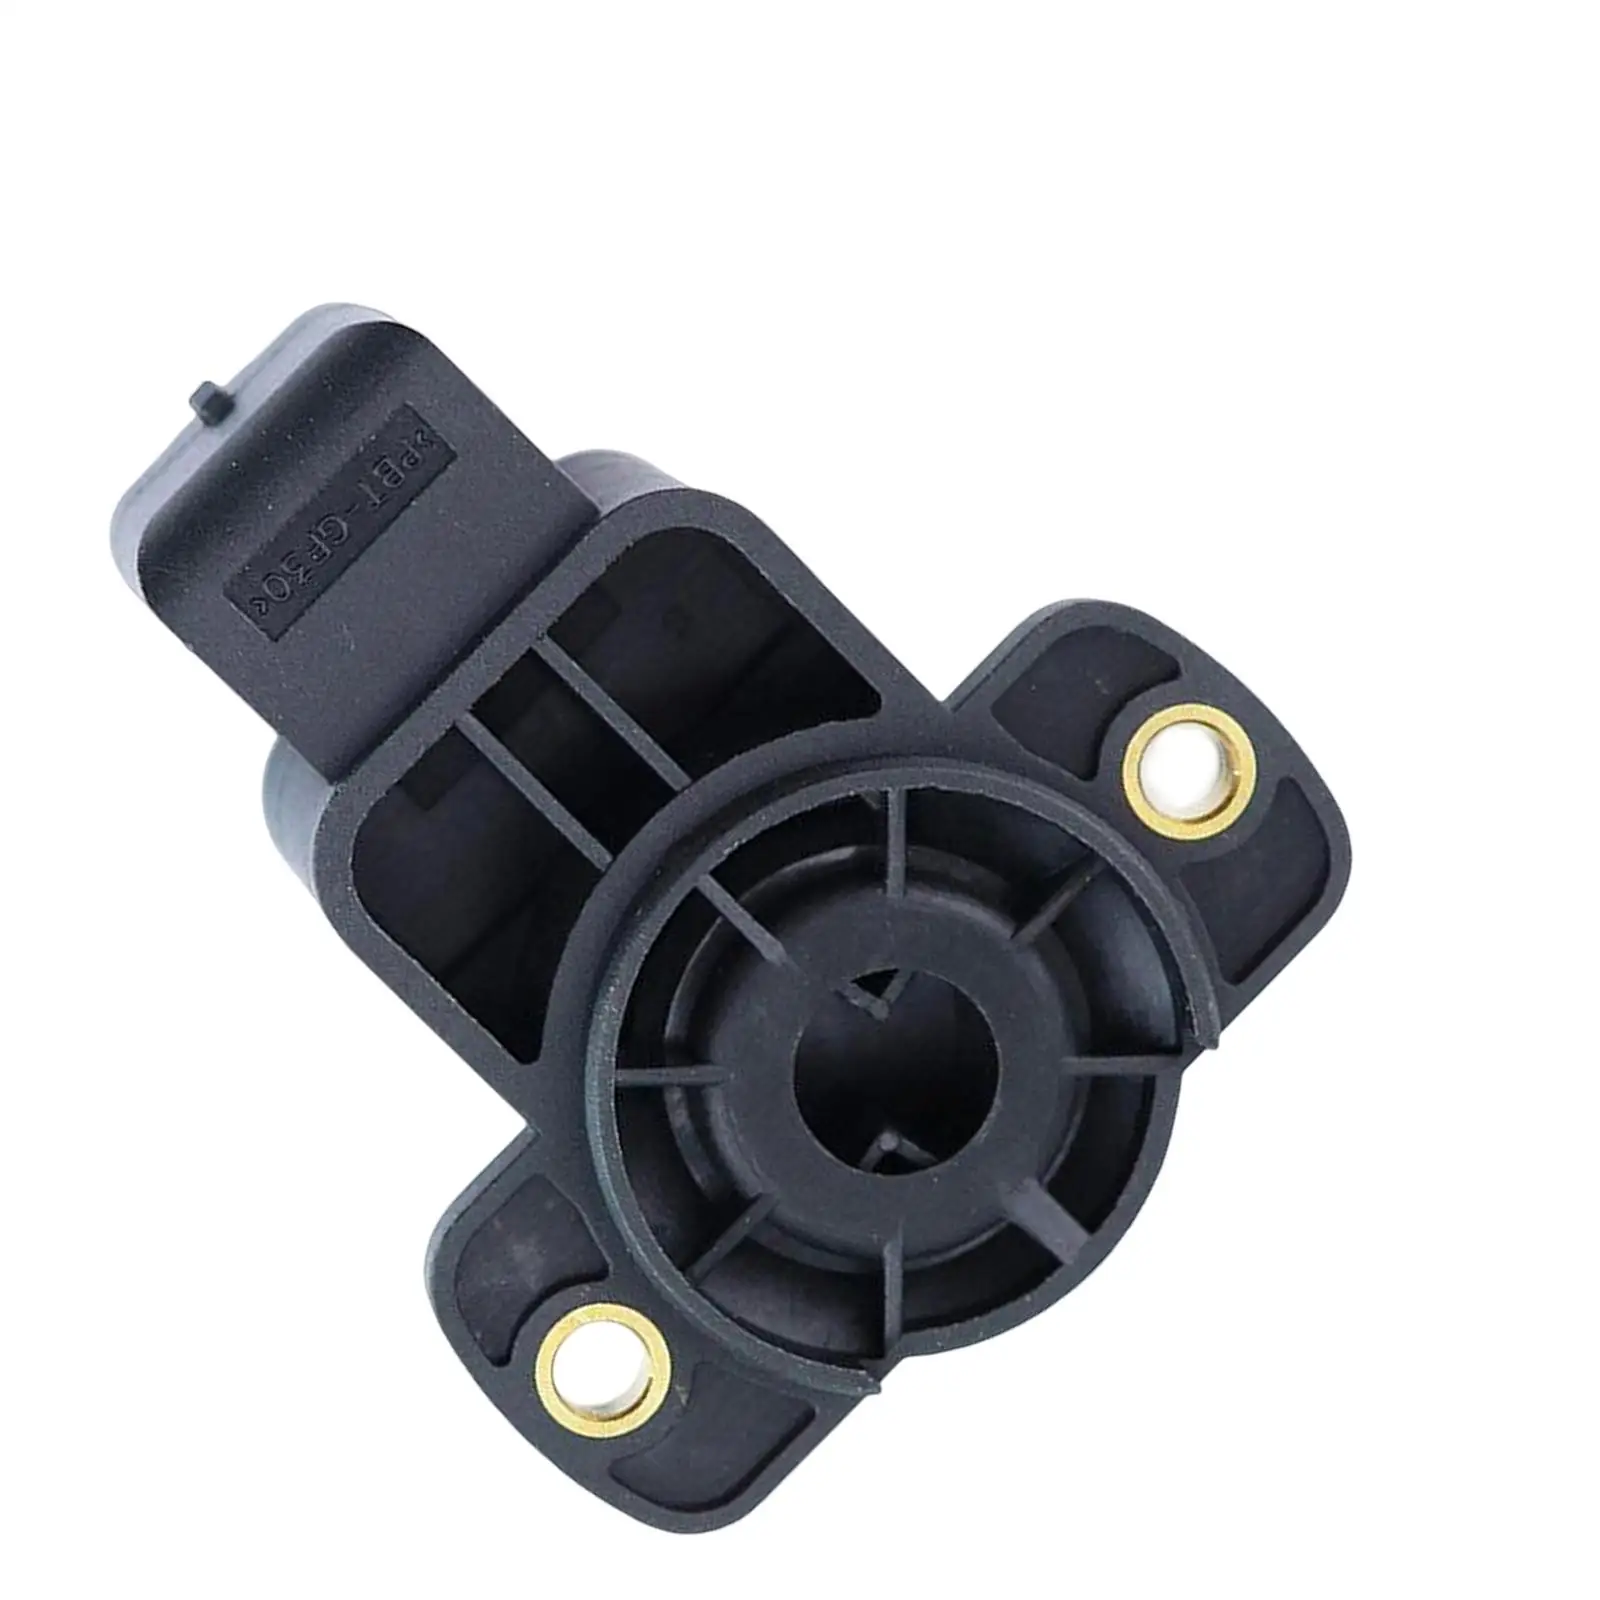 Throttle Position Sensor 9642473280 Fit for C2 Direct Replaces Accessory